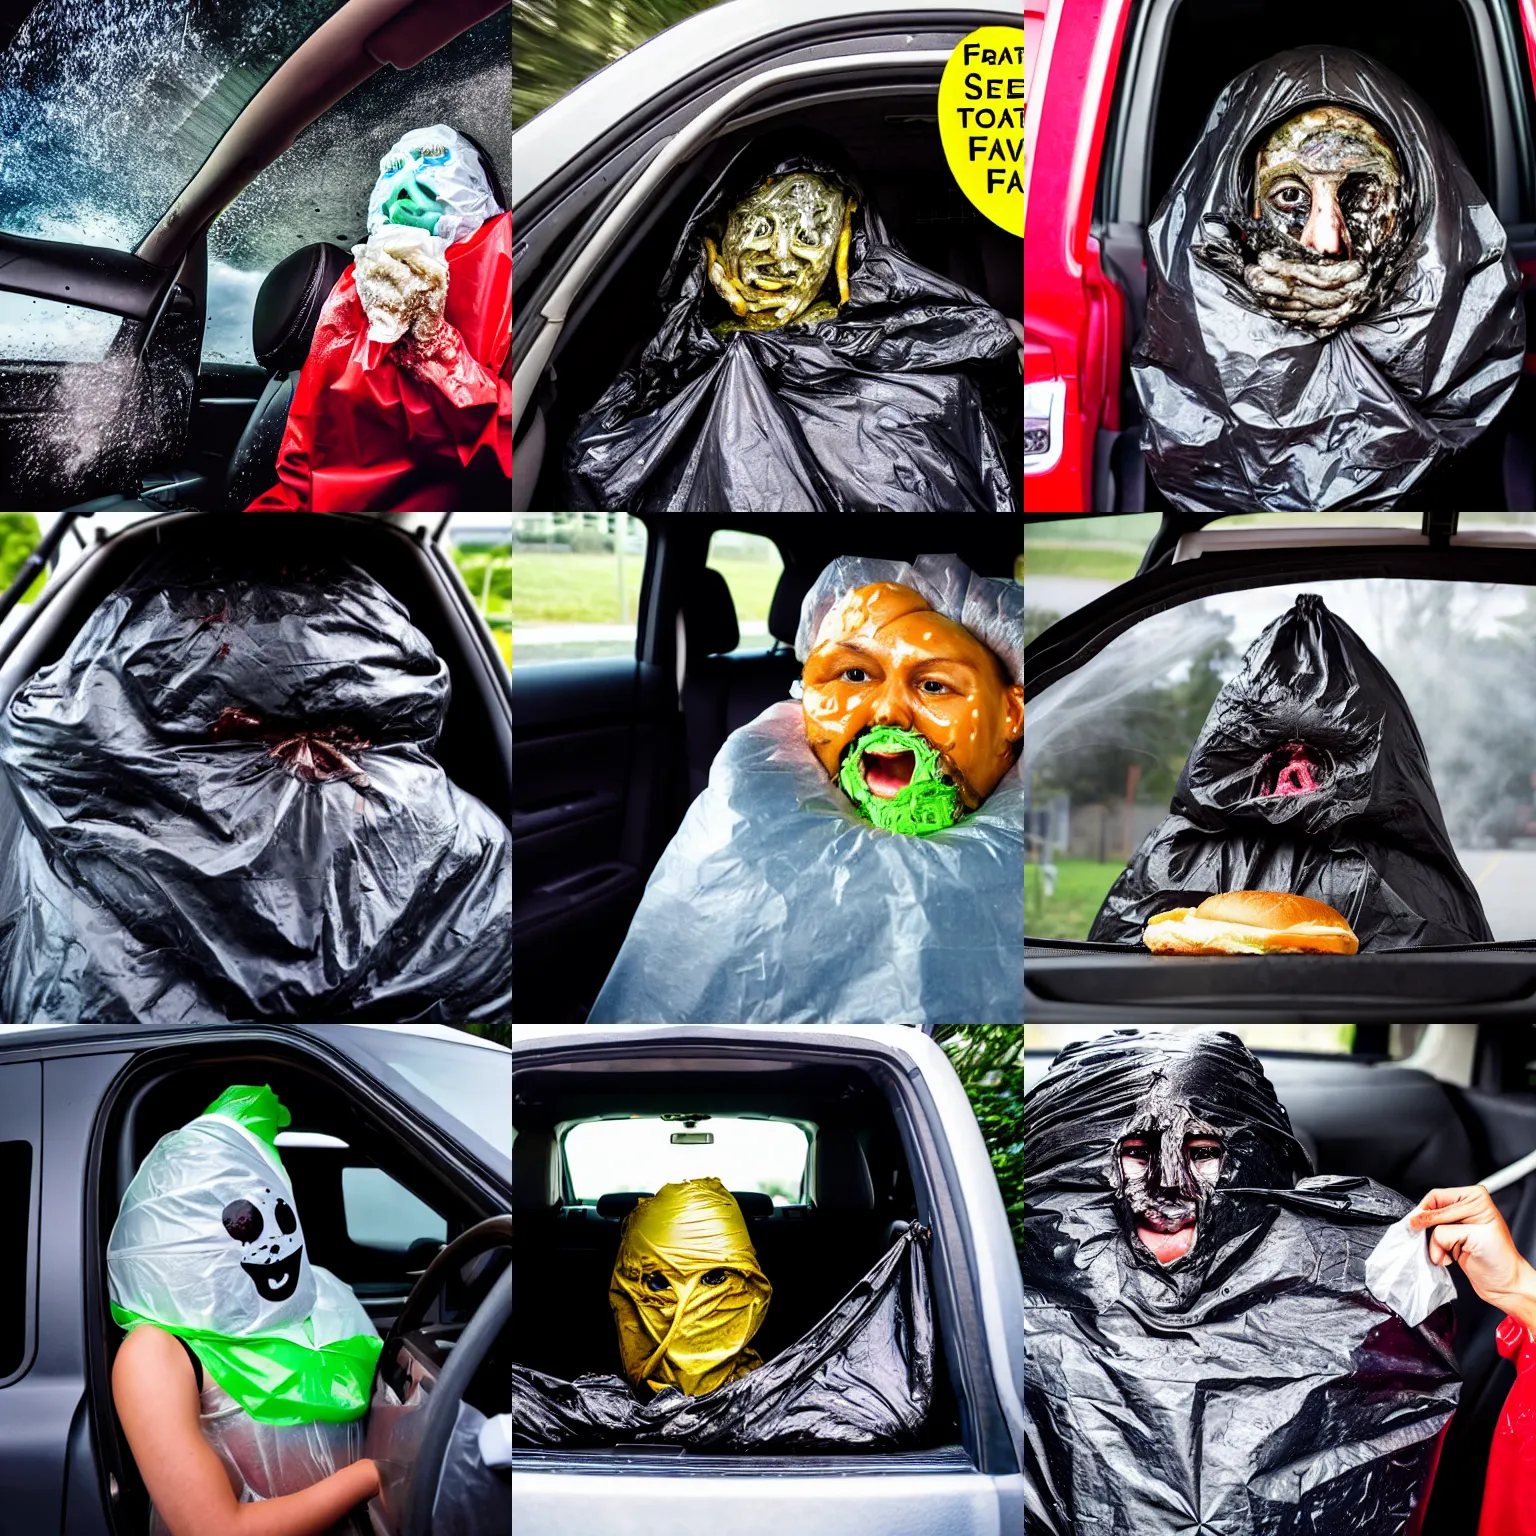 Prompt: steaming stinking garbage bag with human face oozing goo inside car, fast food review, wide angle, specular highlights, fetid atmosphere